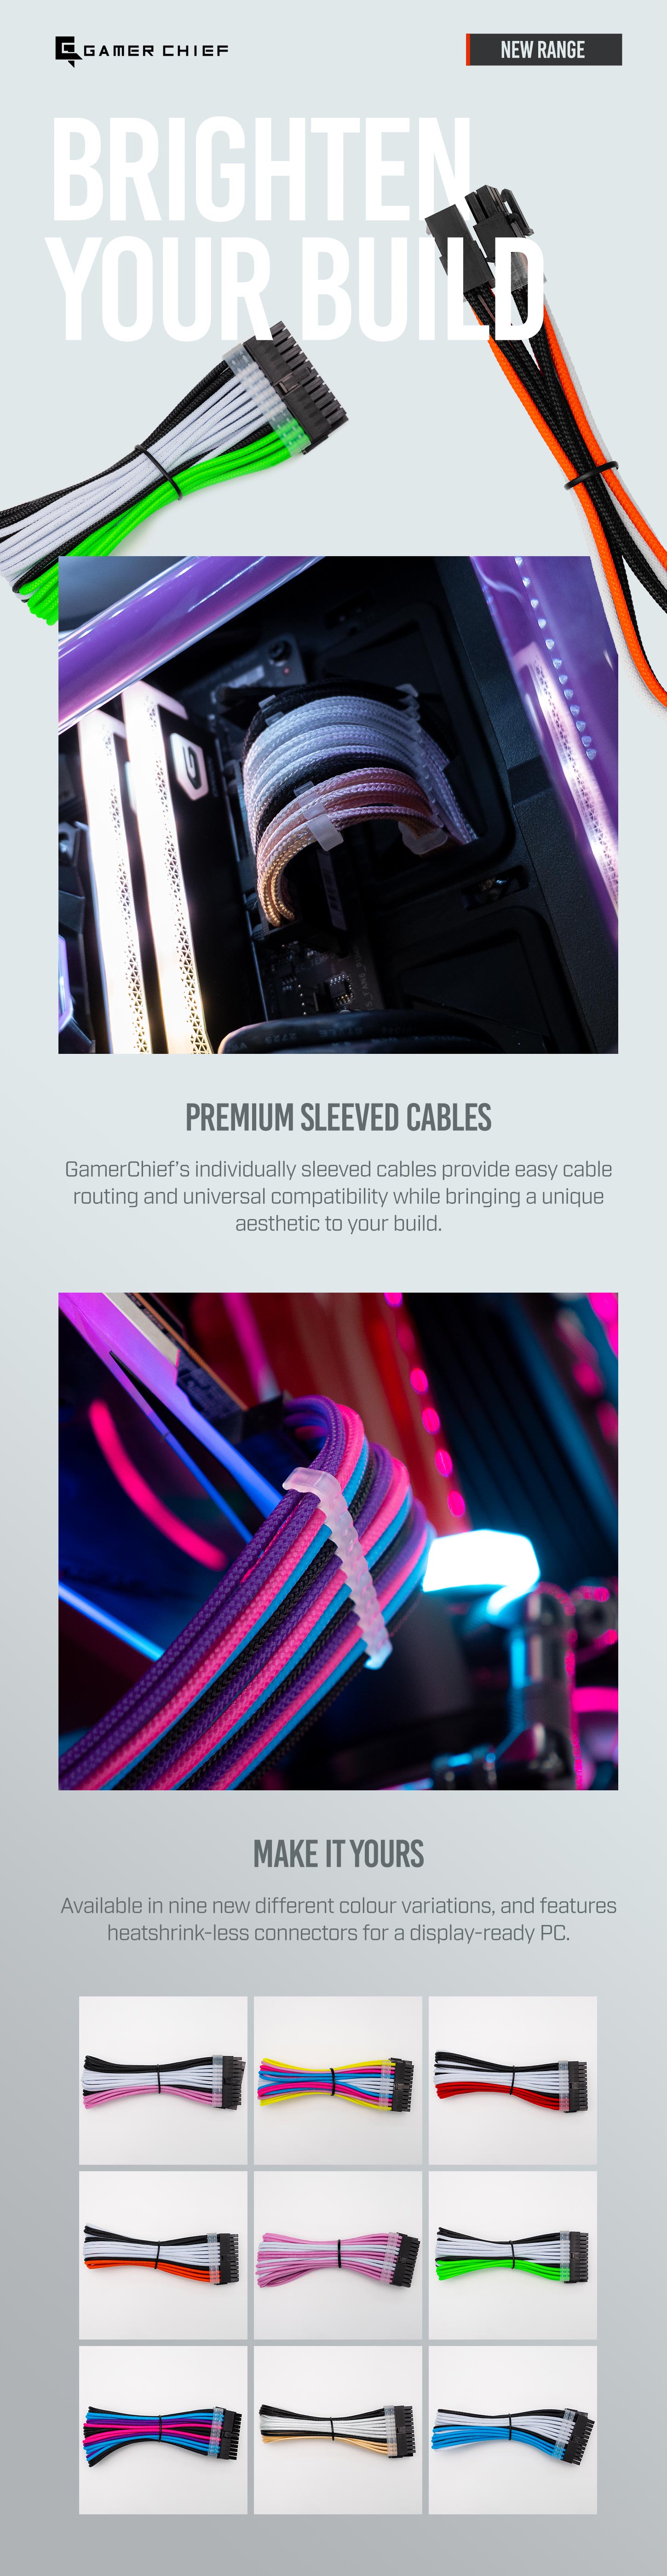 A large marketing image providing additional information about the product GamerChief Elite Series 24-Pin ATX 30cm Sleeved Extension Cable (Blue/White/Black) - Additional alt info not provided